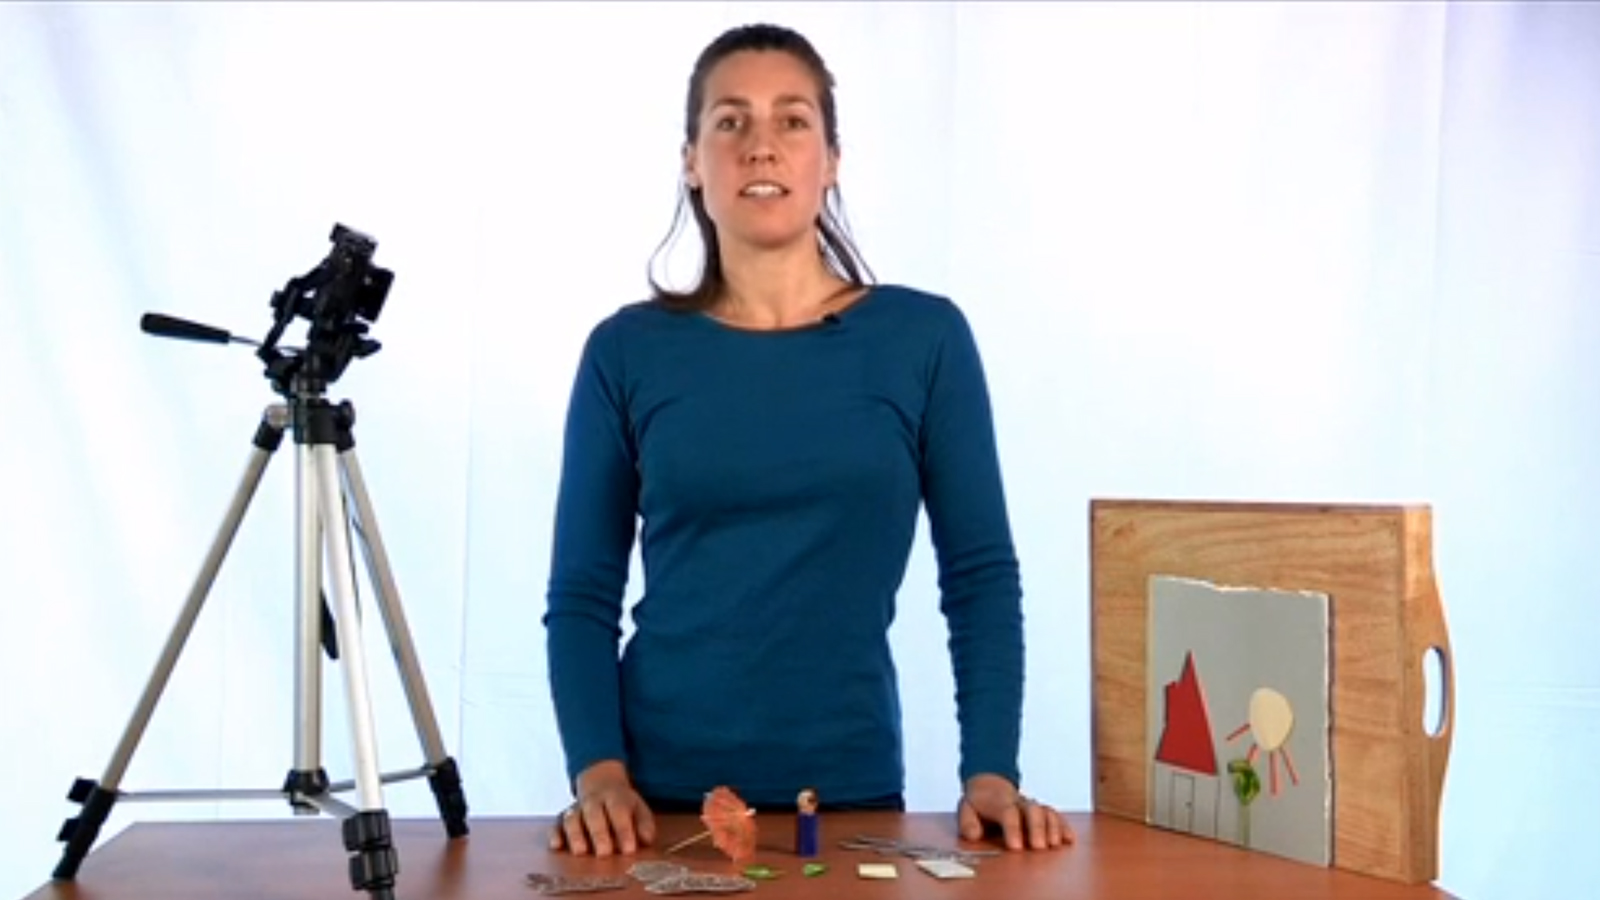 Create a Stop Motion Animation